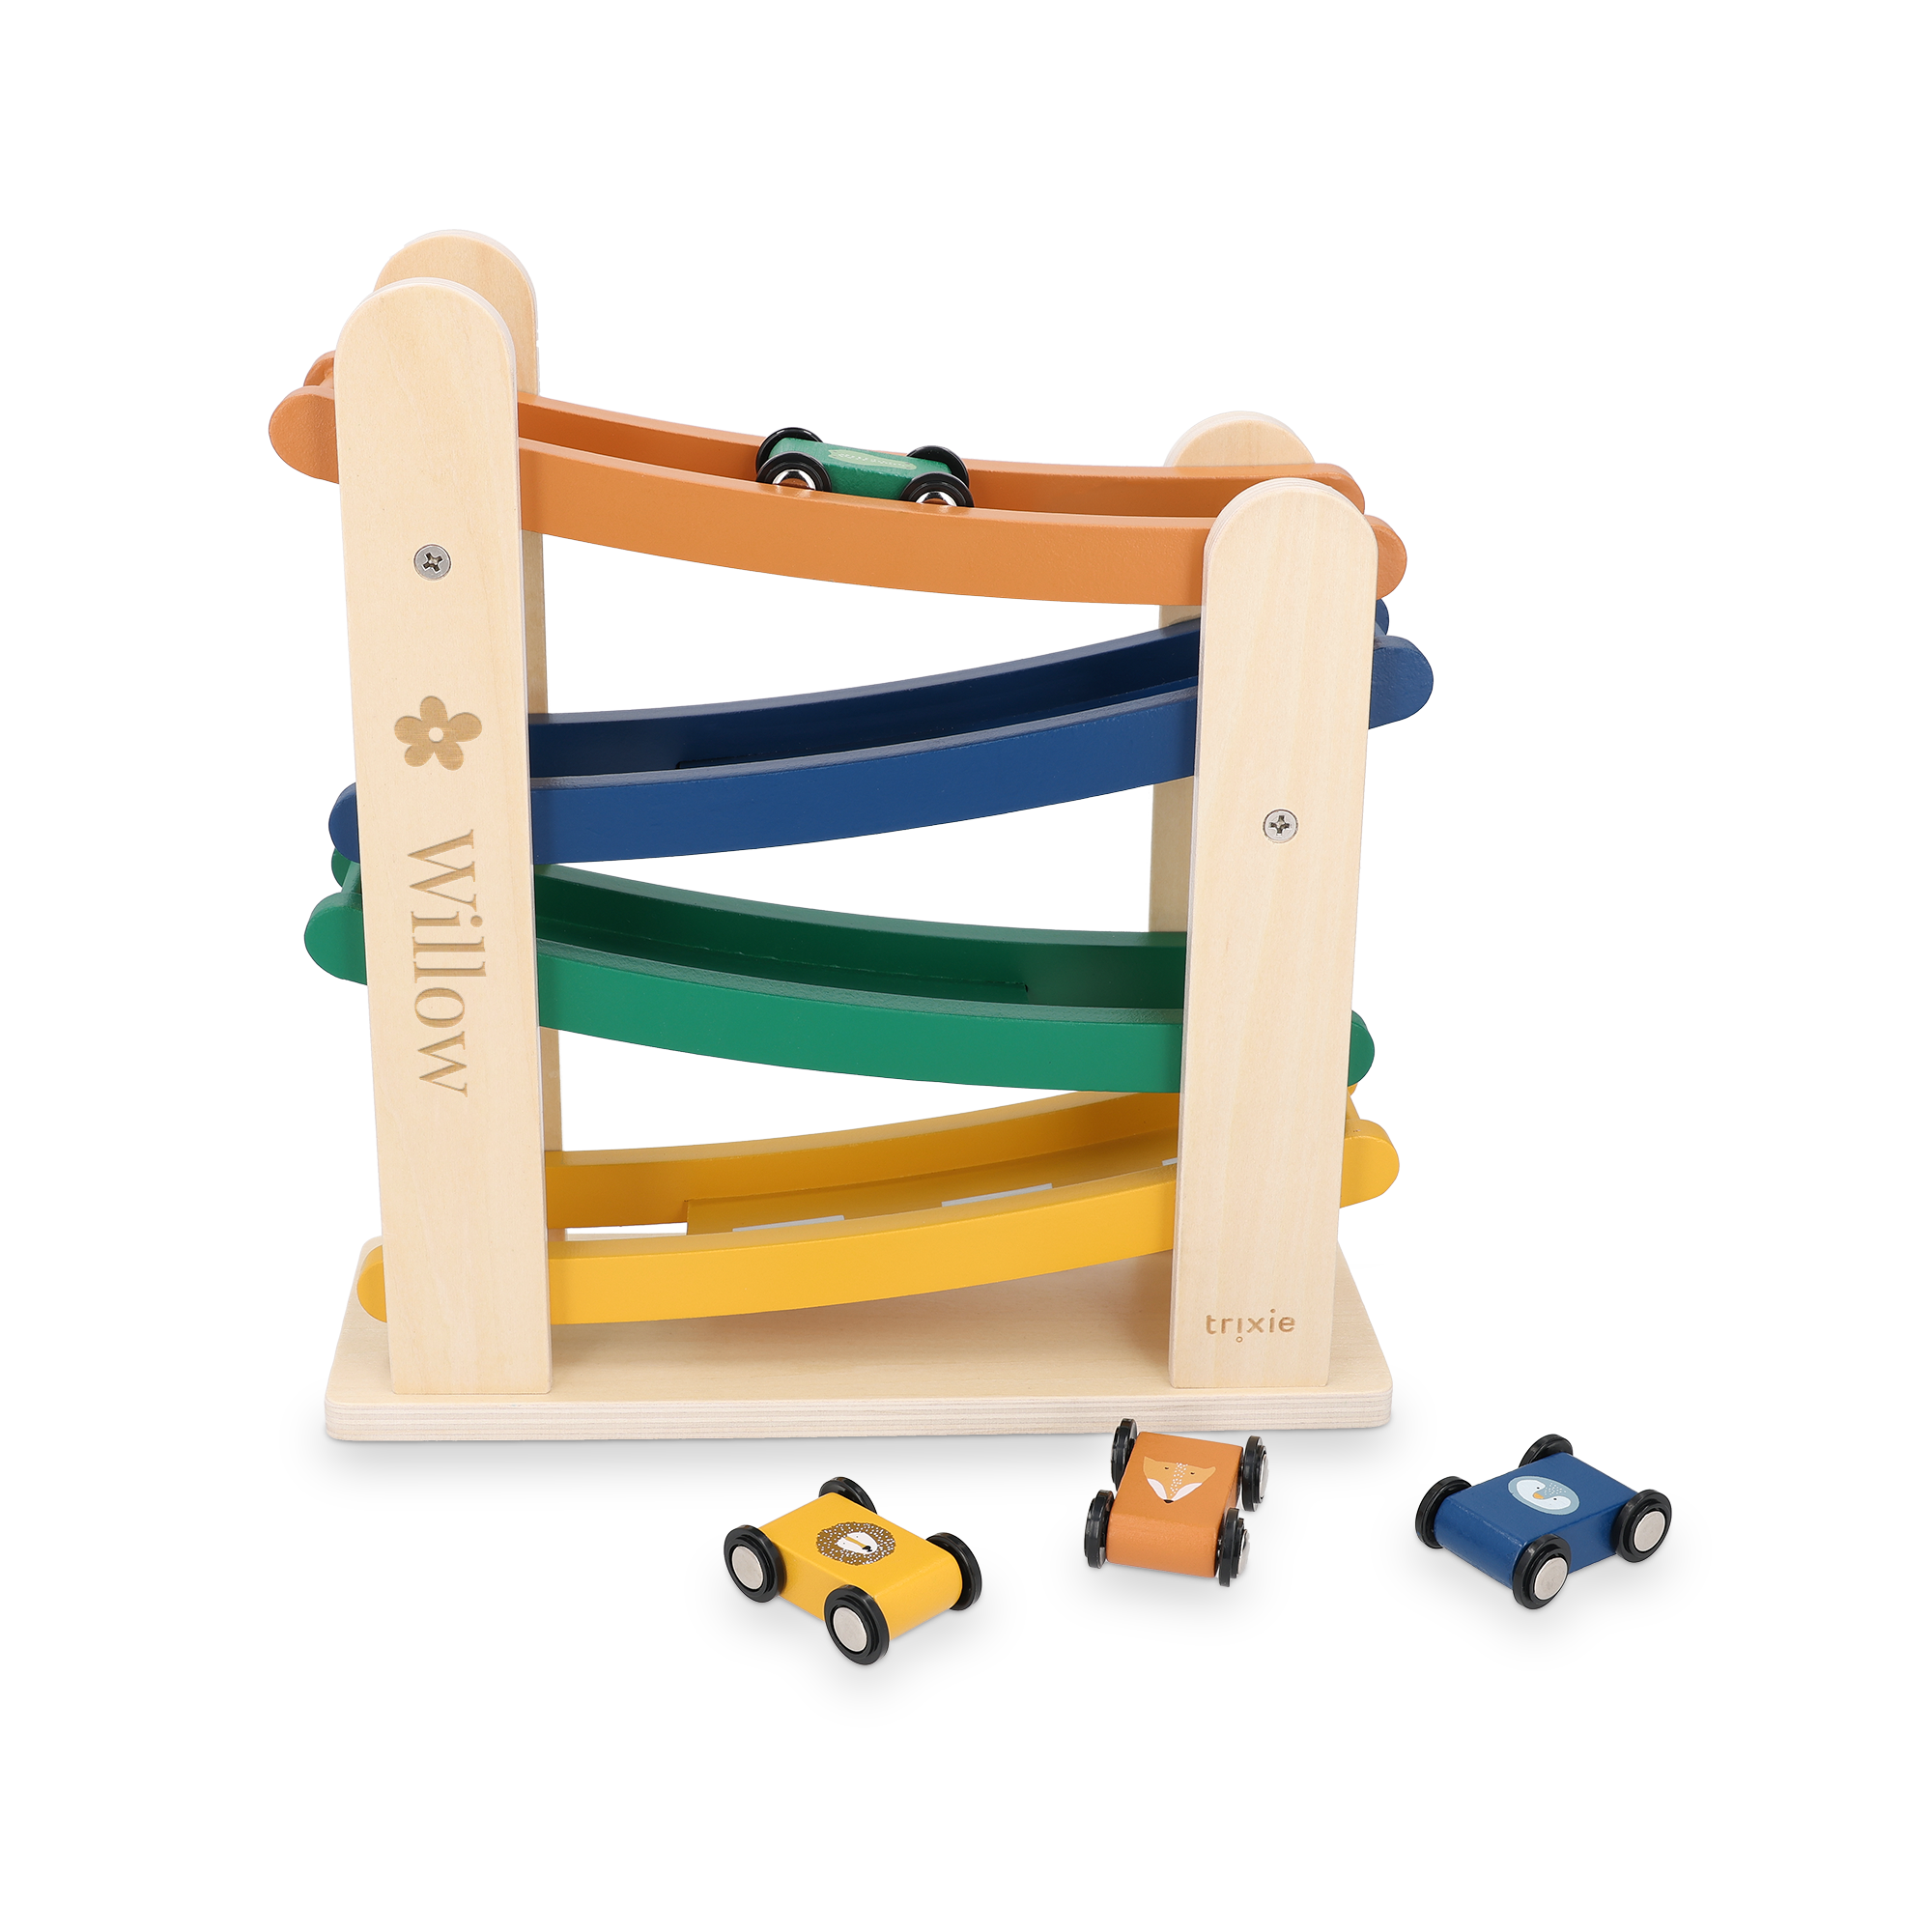 Personalised wooden ramp racer toy - Trixie